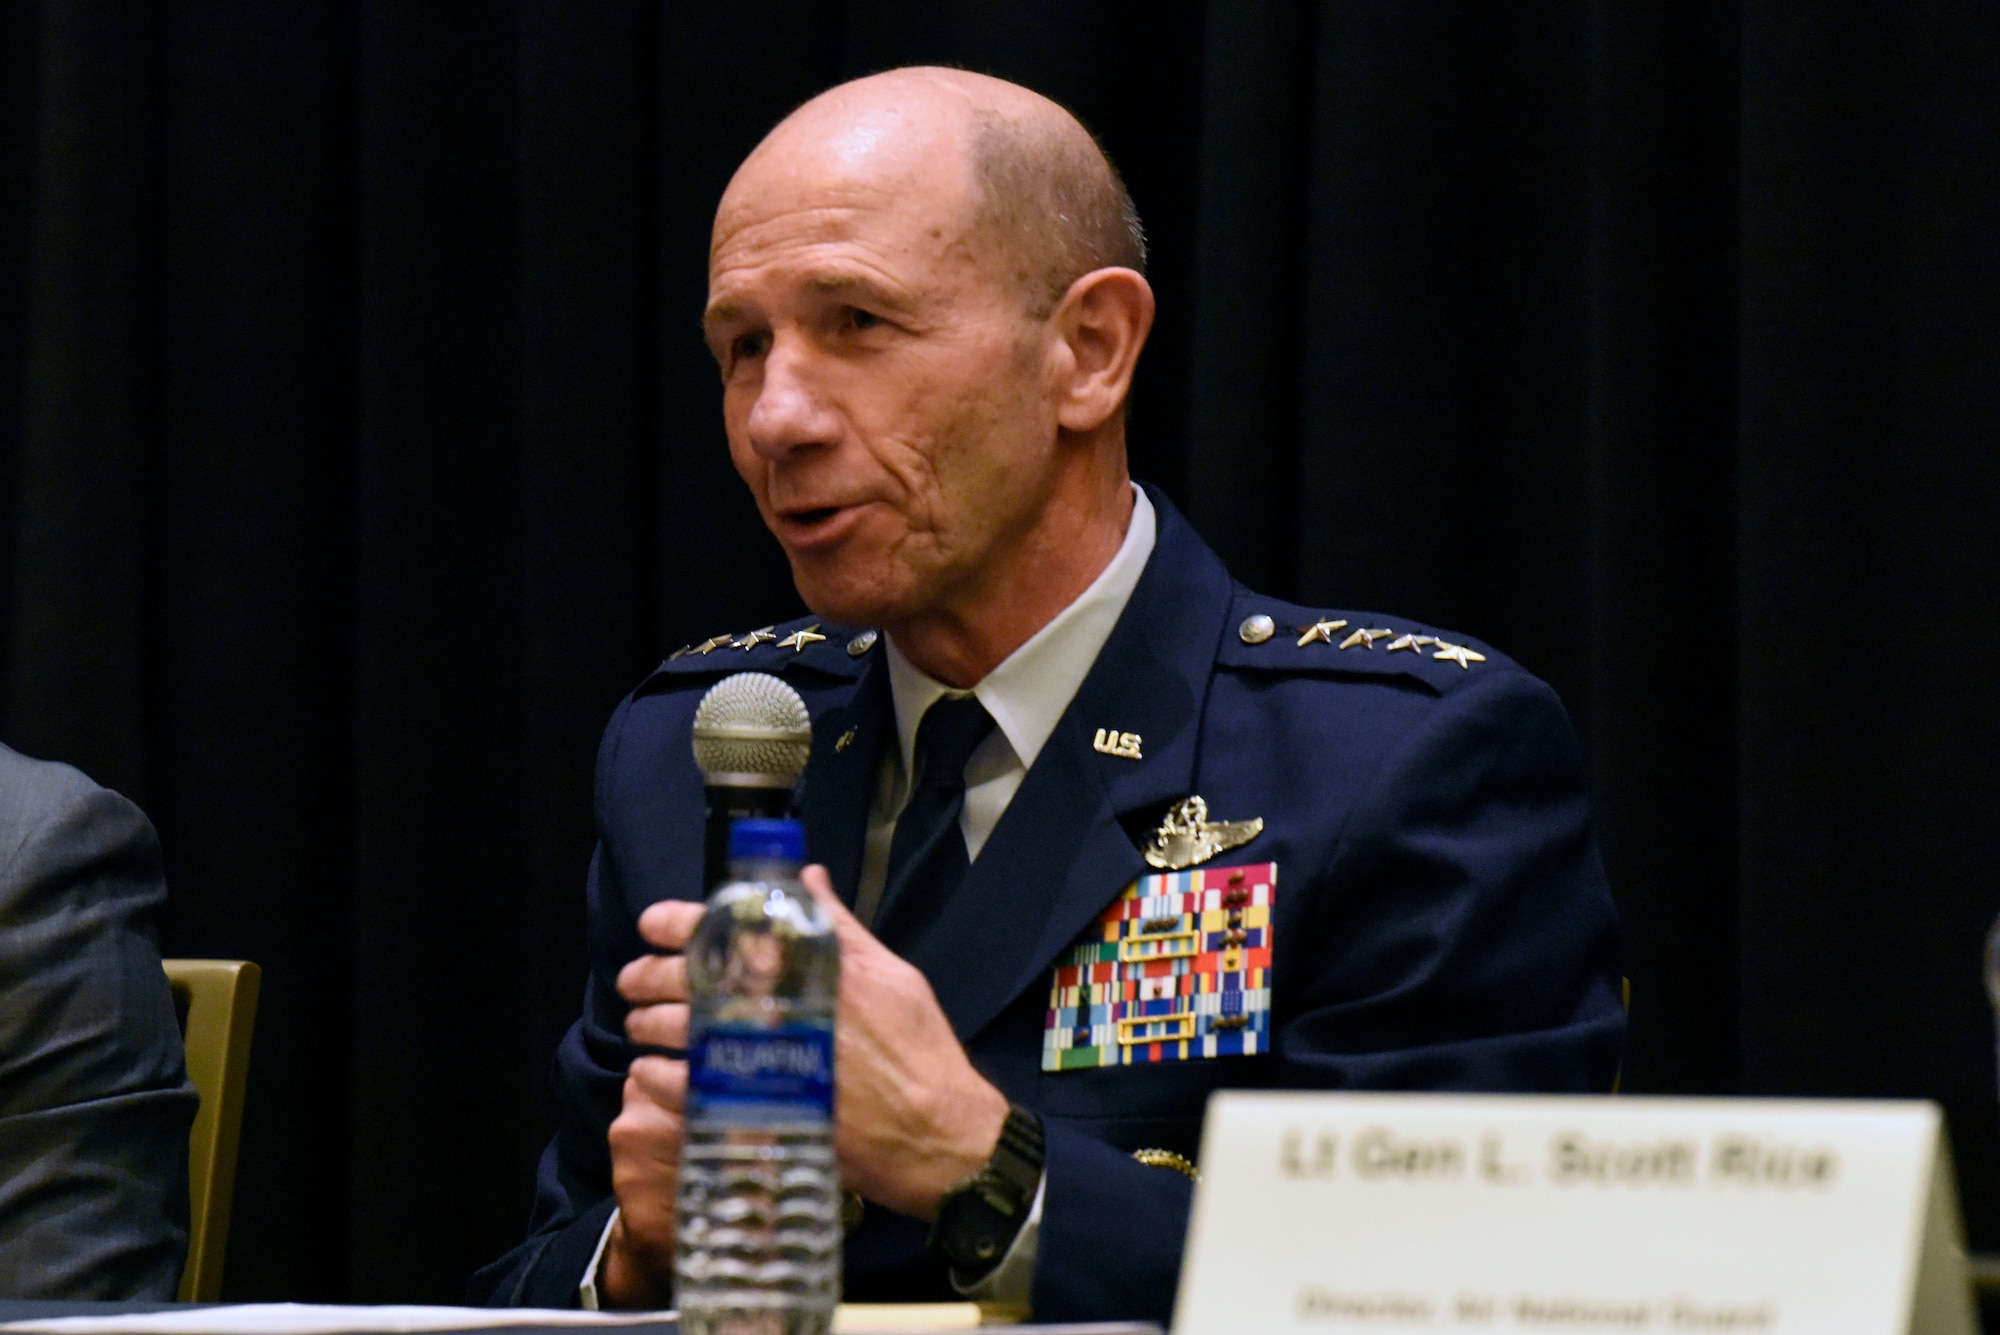 Gen. James M. Holmes, Air Combat Command commander, participates in a panel about the total force during the Air Force Association’s Air, Space and Cyber Conference Sept. 18, 2018, in National Harbor, Md. ASC18 is a professional development conference that offers an opportunity for Department of Defense personnel to participate in forums, speeches, seminars and workshops. (U.S. Air Force photo by Airman 1st Class Zoe M. Wockenfuss)